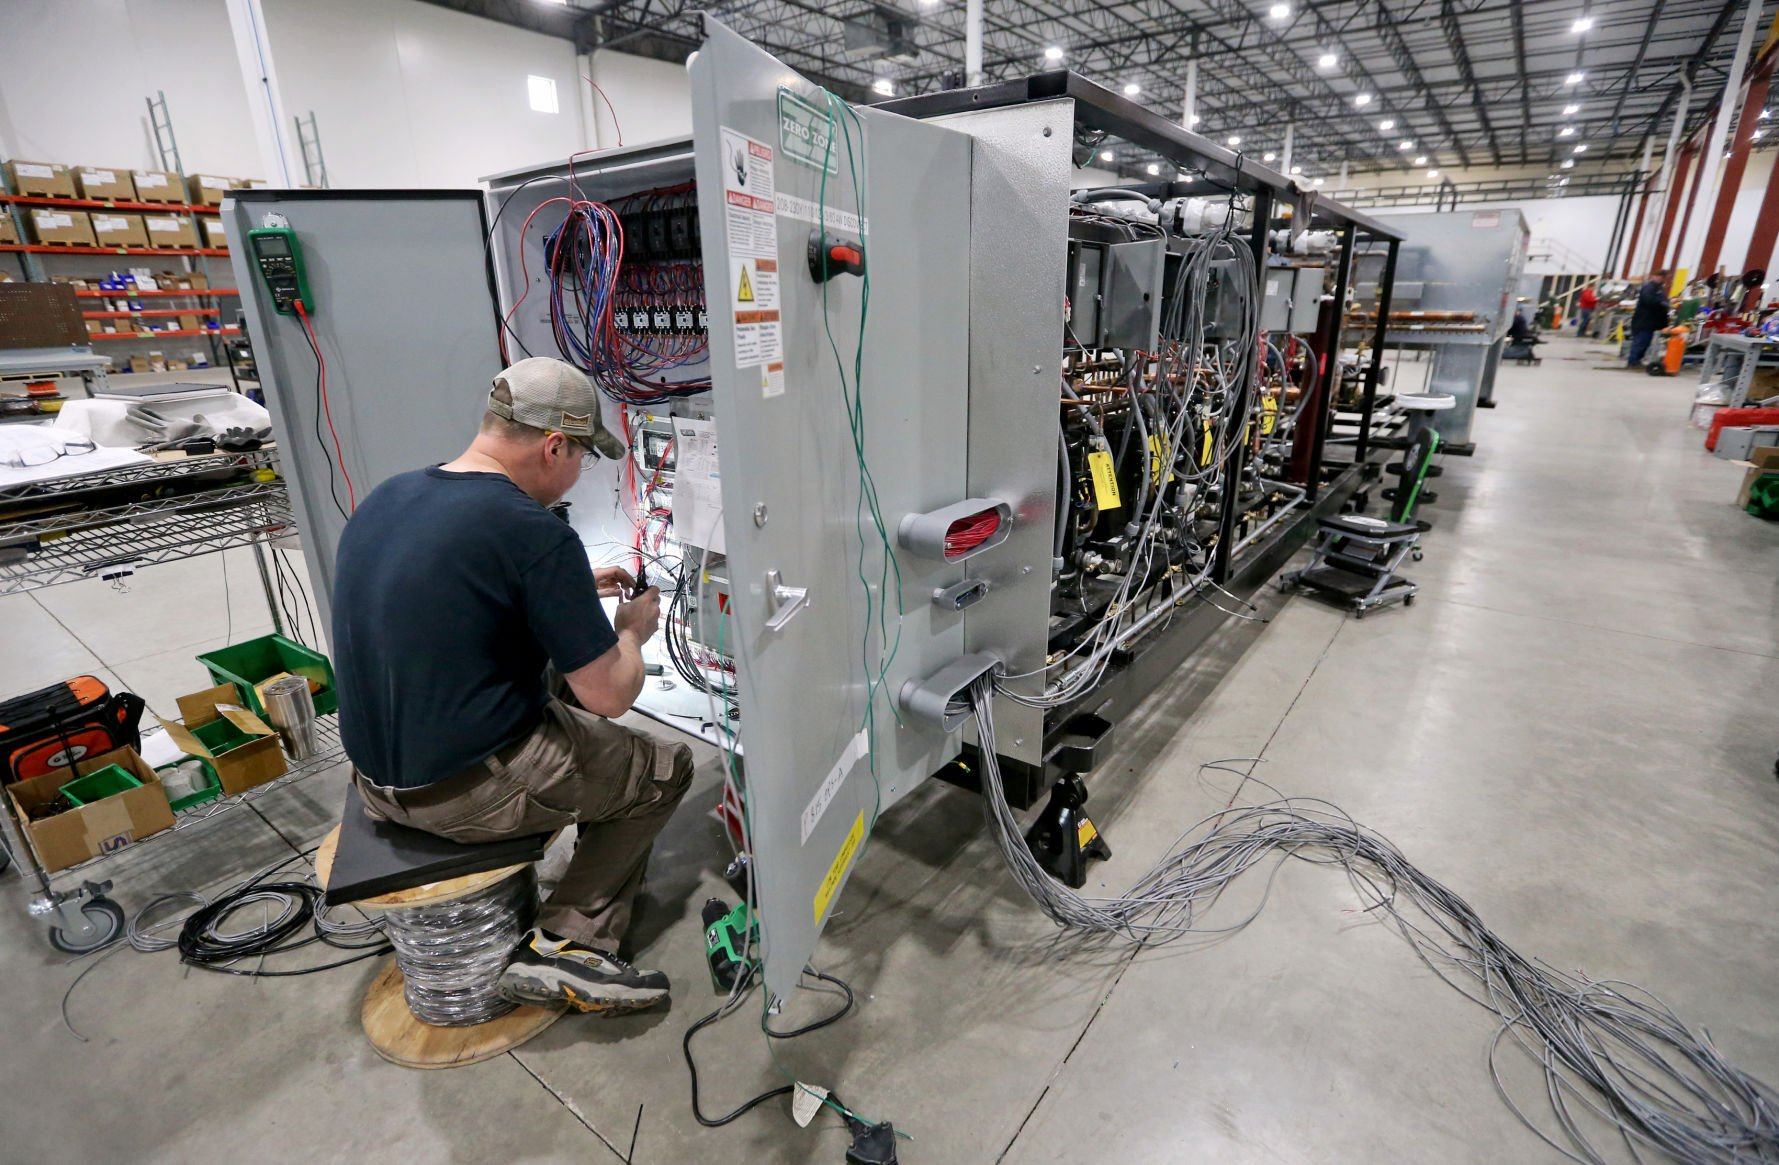 Bob Naeve works to install electrical wiring on an industrial refrigeration unit at Zero Zone in Dyersville, Iowa, on Thursday, May 5, 2022.    PHOTO CREDIT: JESSICA REILLY